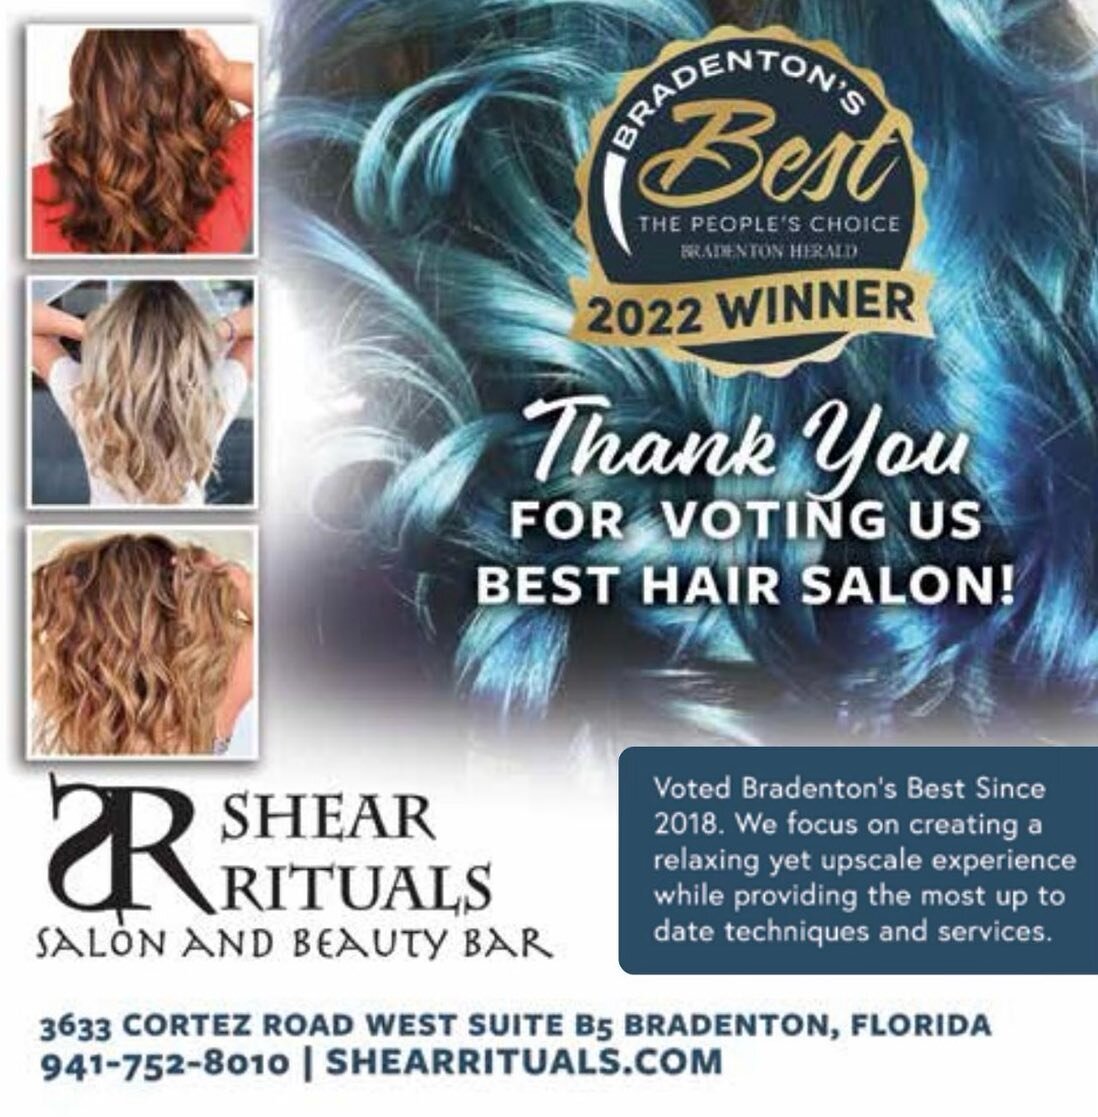 The Votes of @bradentonherald Peoples Choice Awards Are In-And We Can&rsquo;t Thank You Enough For Voting Us Bradentons Best Hair Salon! Thank You All So Much For Your Continued Love And Support. ❤️#youreawinnerbaby #bestofbradenton #shearrituals